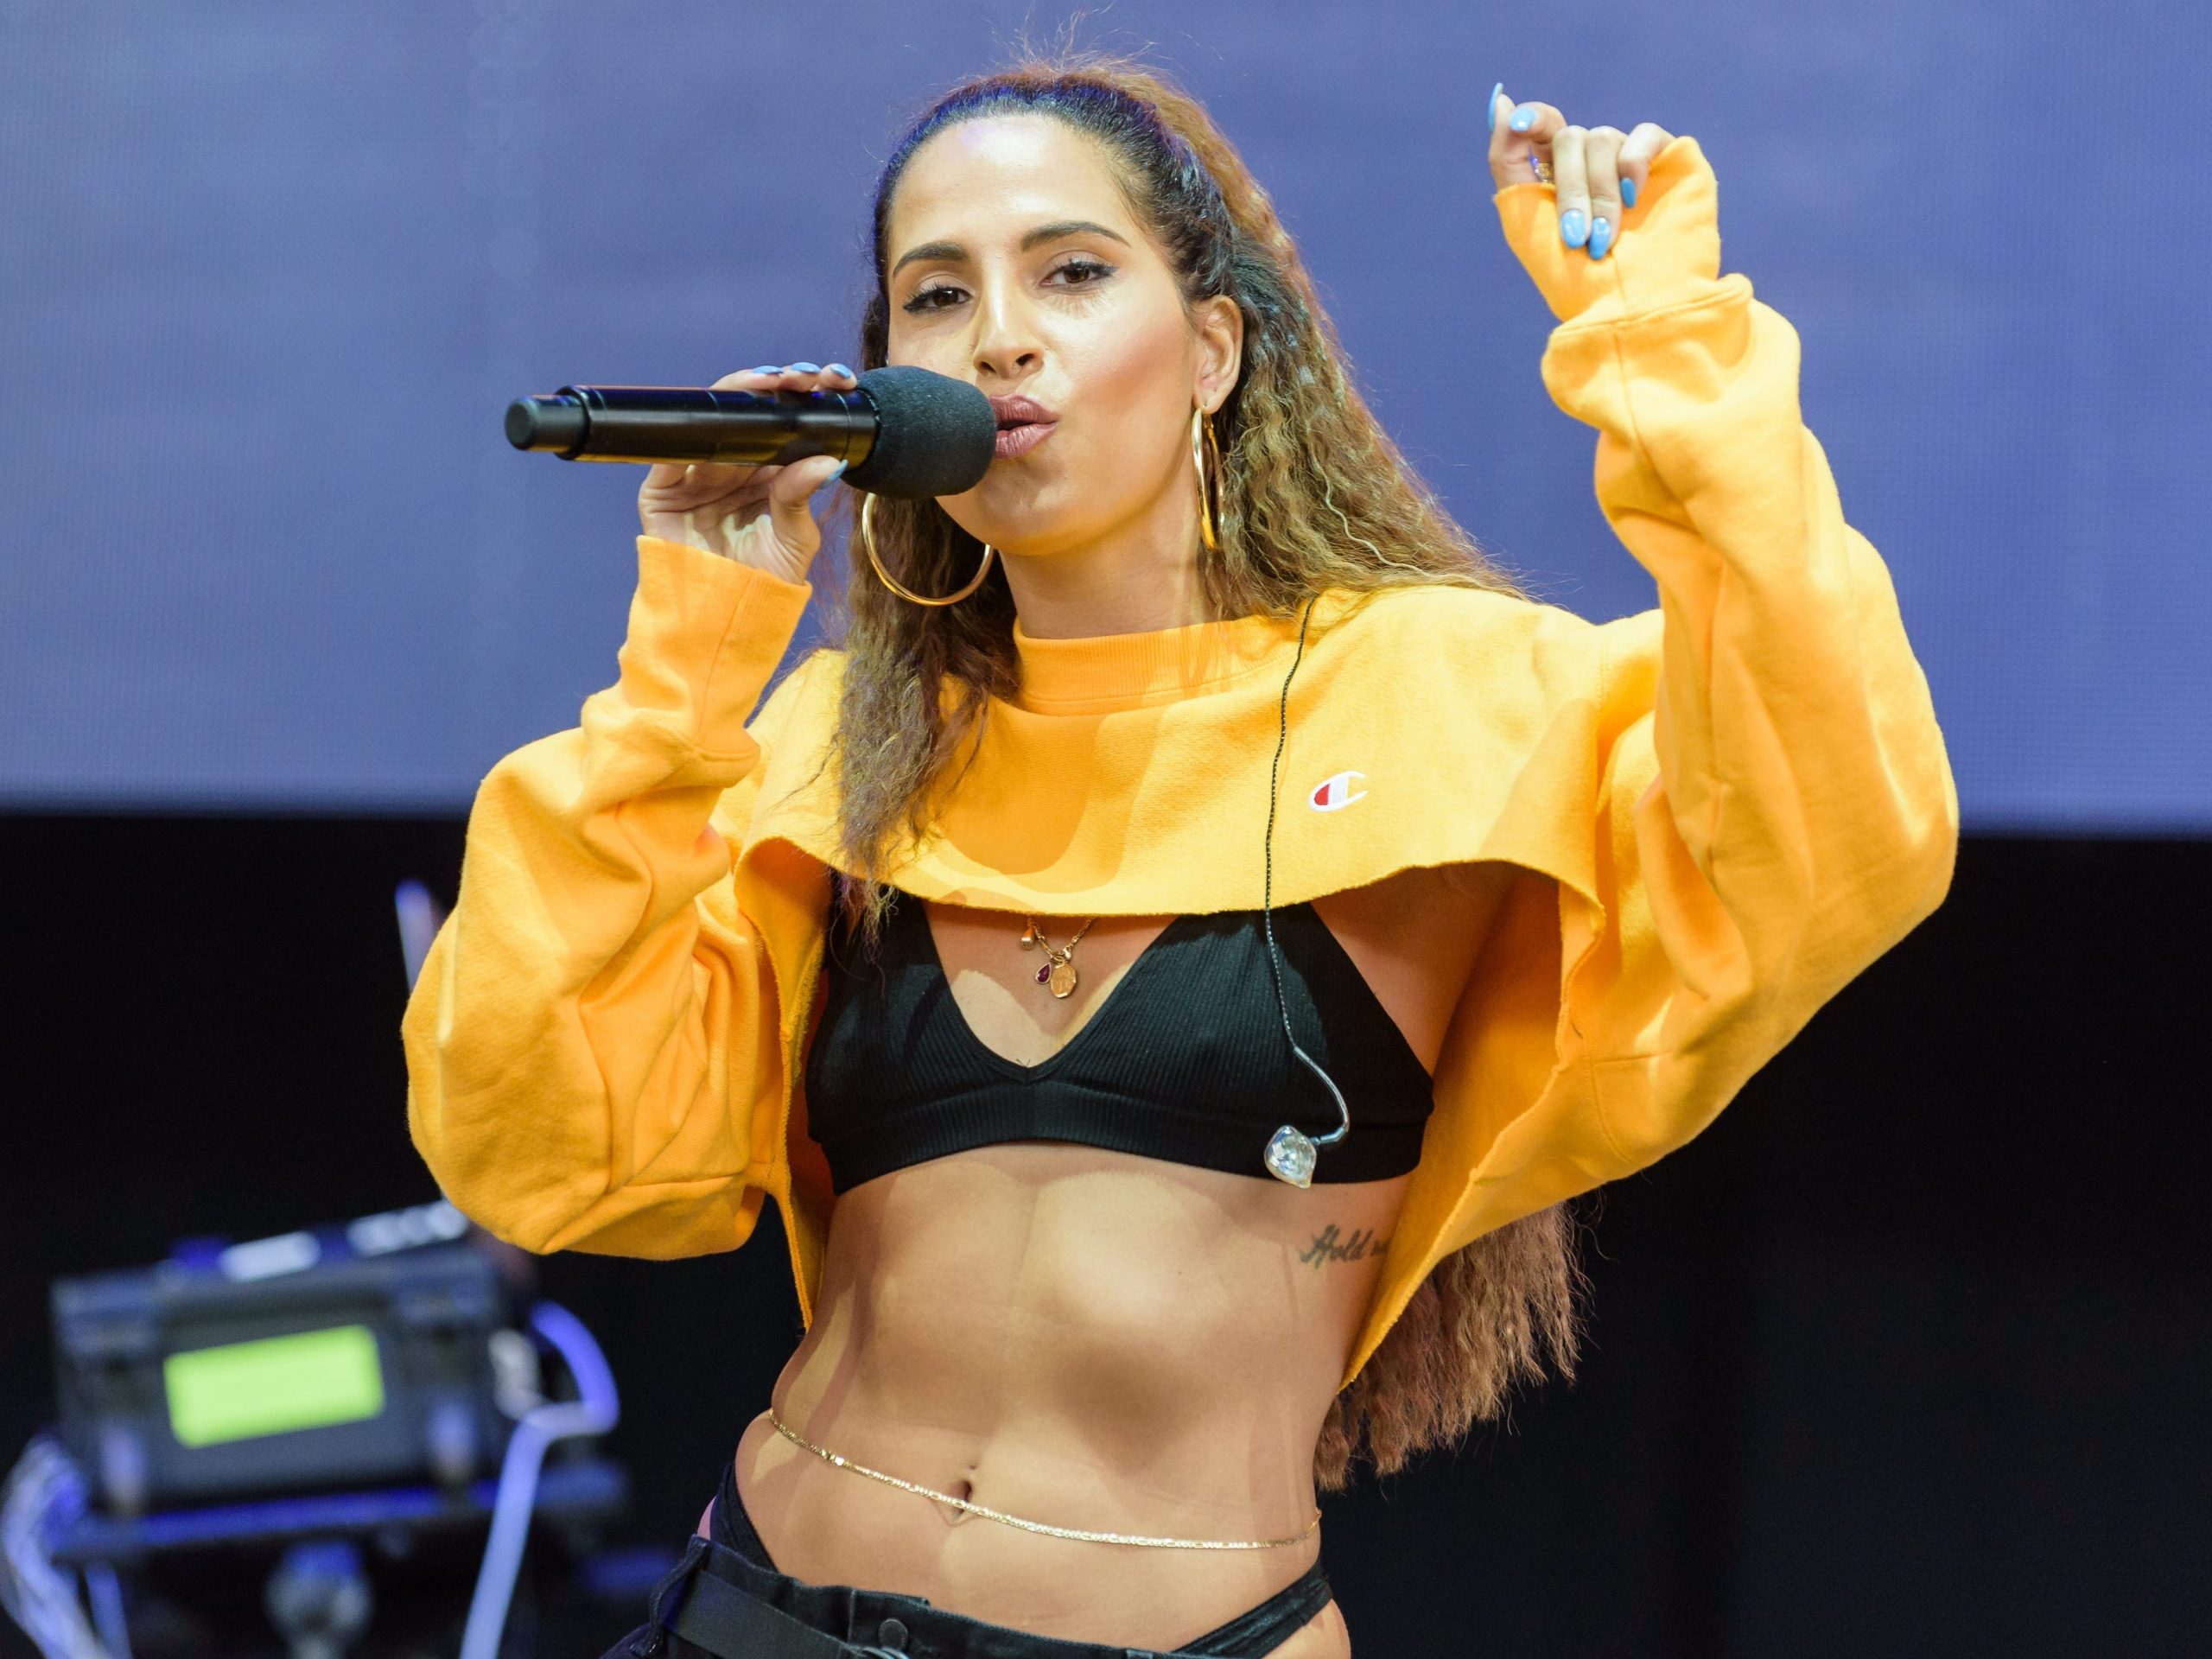 Swedish singer Snoh Aalegra faced backlash for evading questions about her ethnic identity after R&B fans criticized her use of a racial epithet in a song.